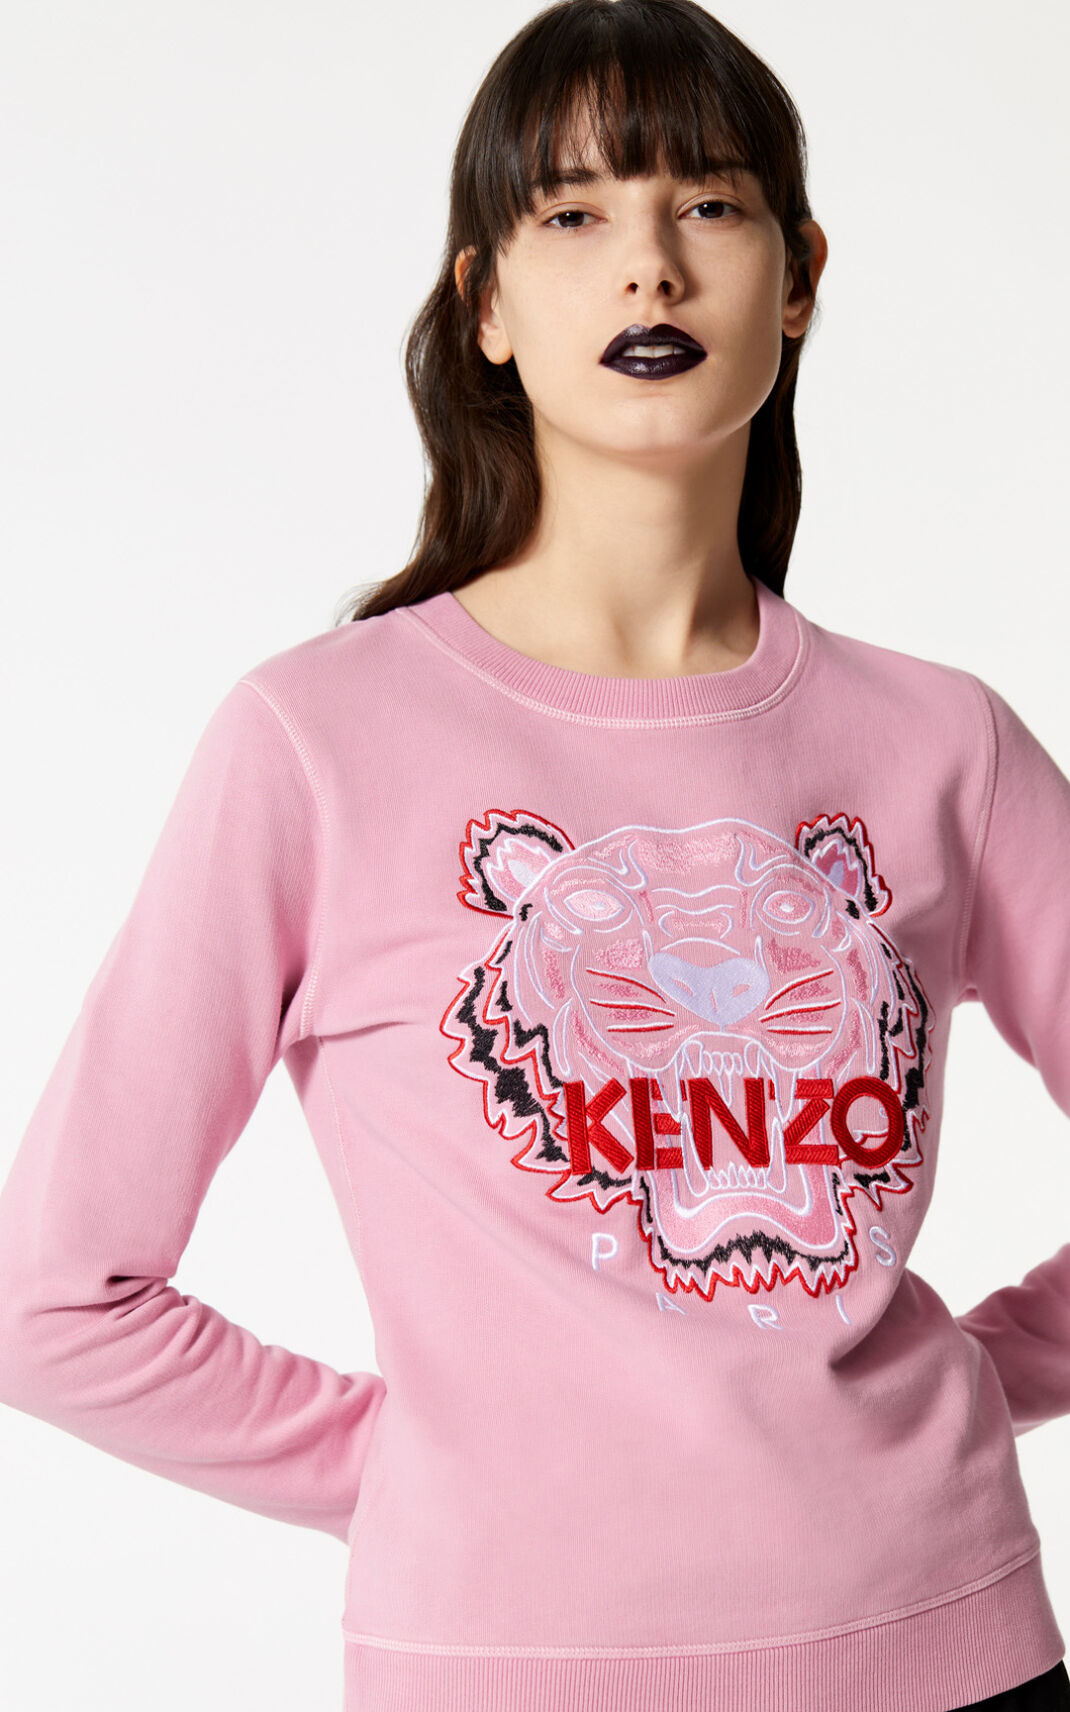 Kenzo Bleached Tiger Sweatshirt Rose For Womens 8501BNOCD